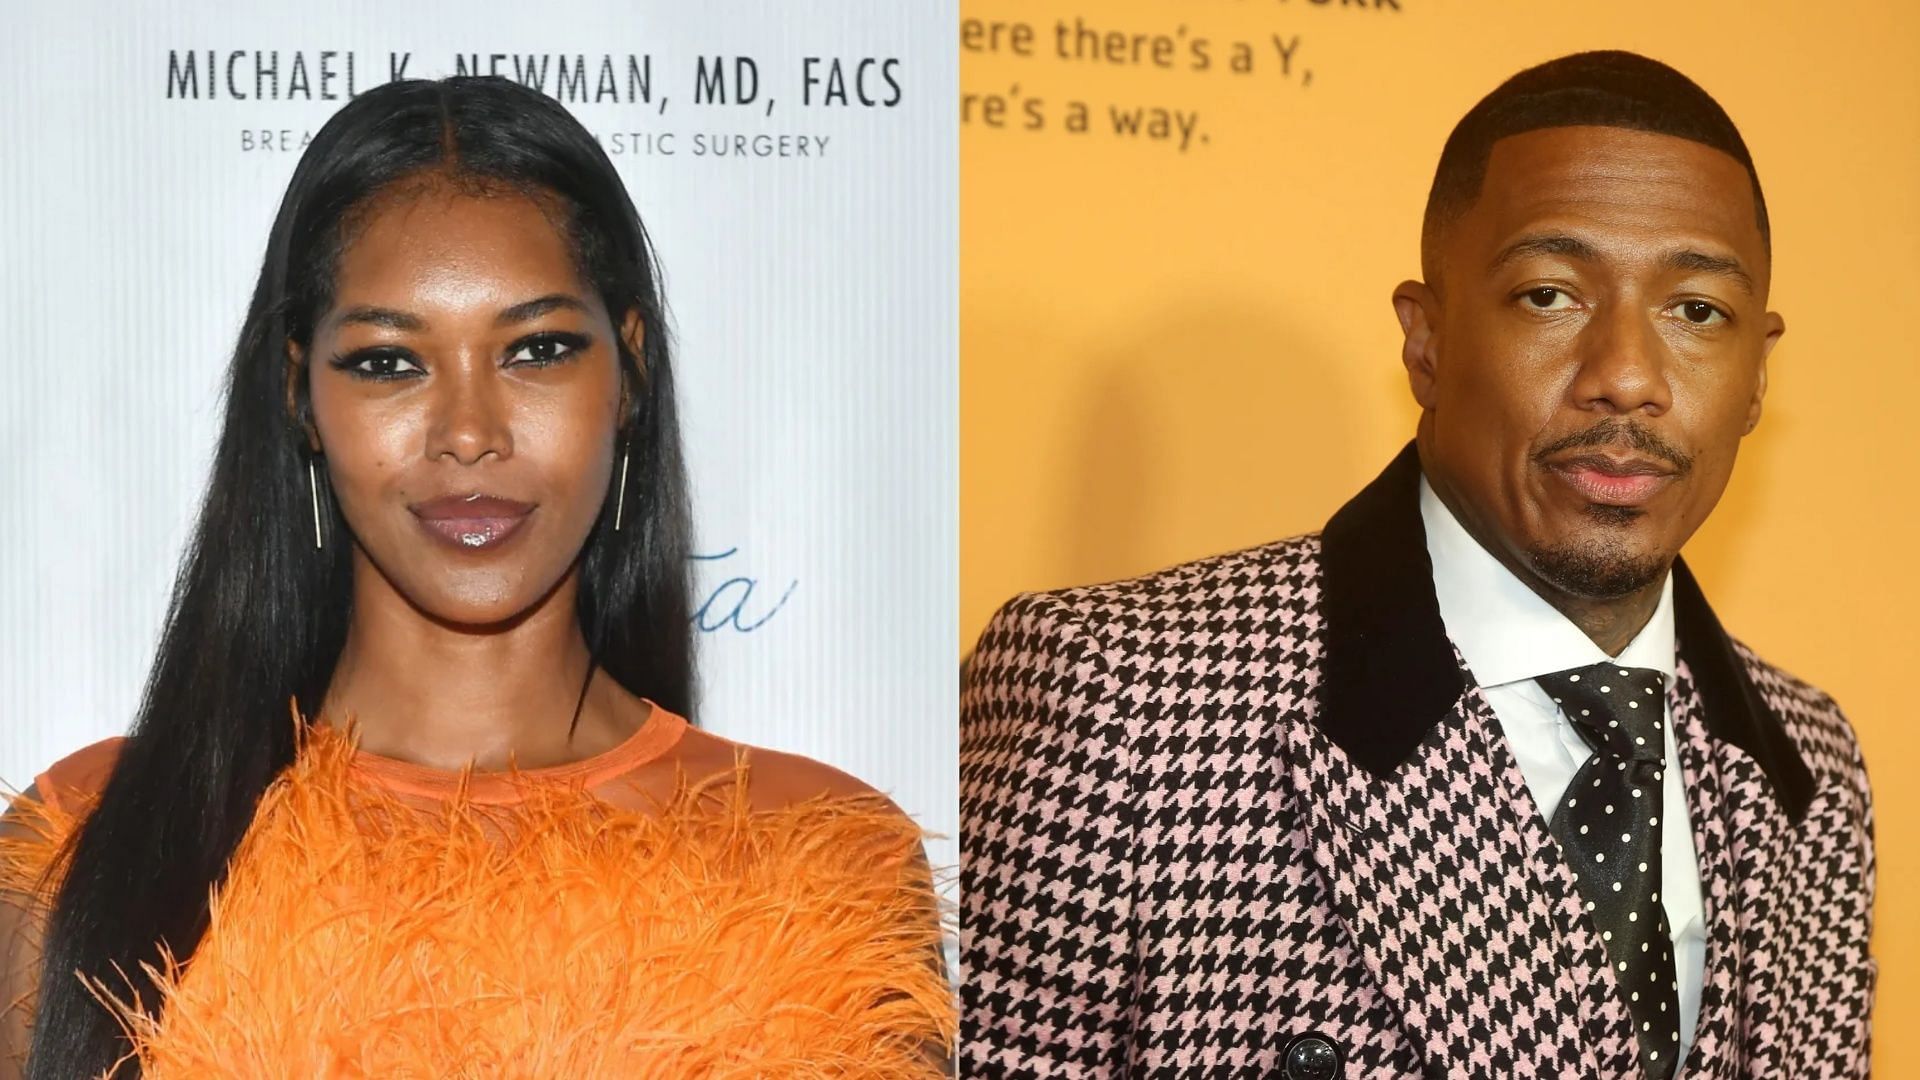 Love &amp; Hip Hop: Atlanta star Jessica White pens heartfelt message to Nick Cannon on deleted Instagram post. (Image via Getty Images)